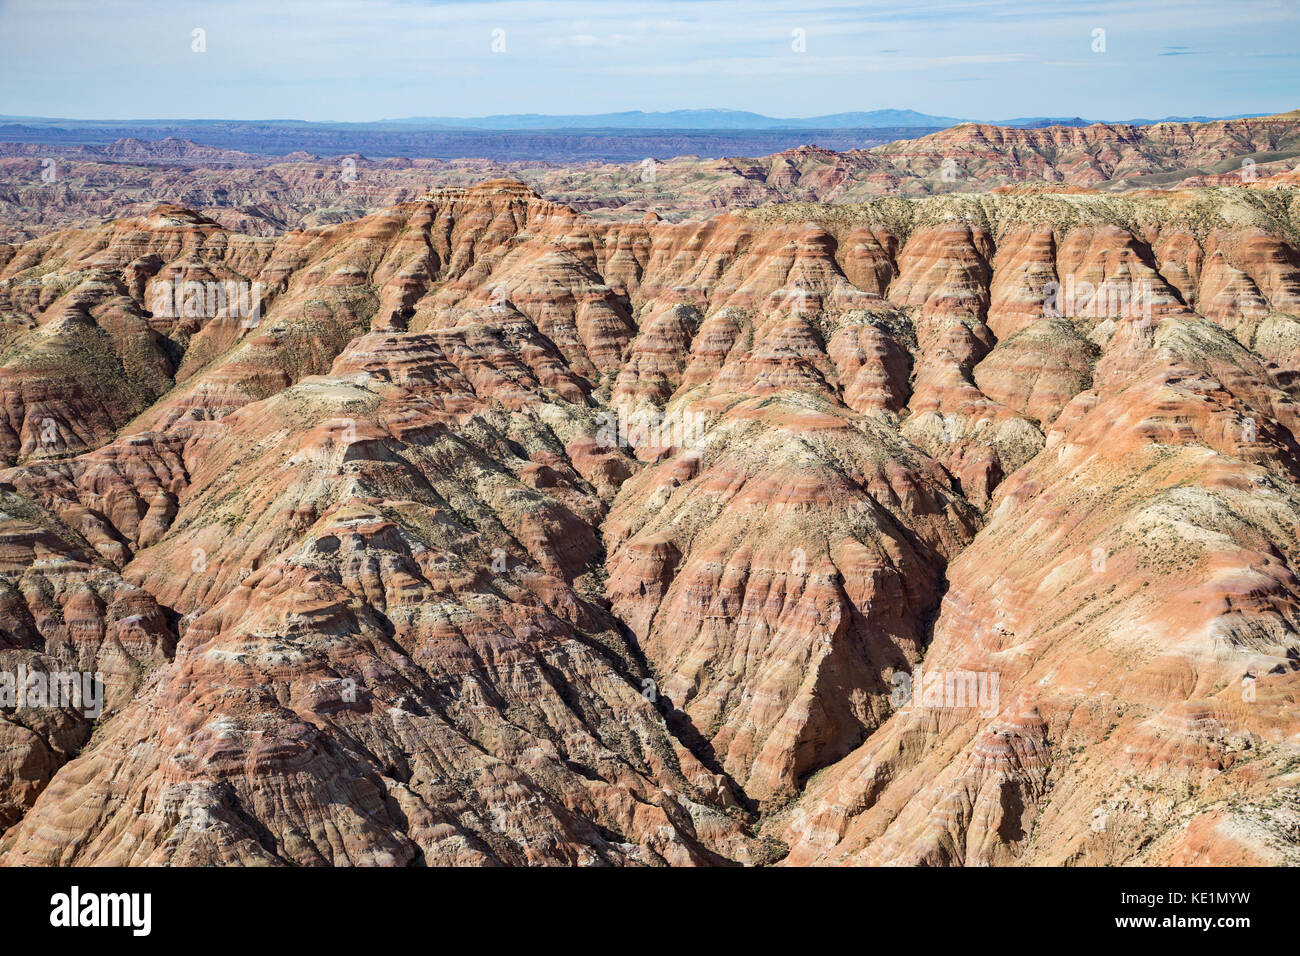 Aerial photos of  the Sheep Mountain Badlands in the Bighorn Basin of Wyoming Stock Photo